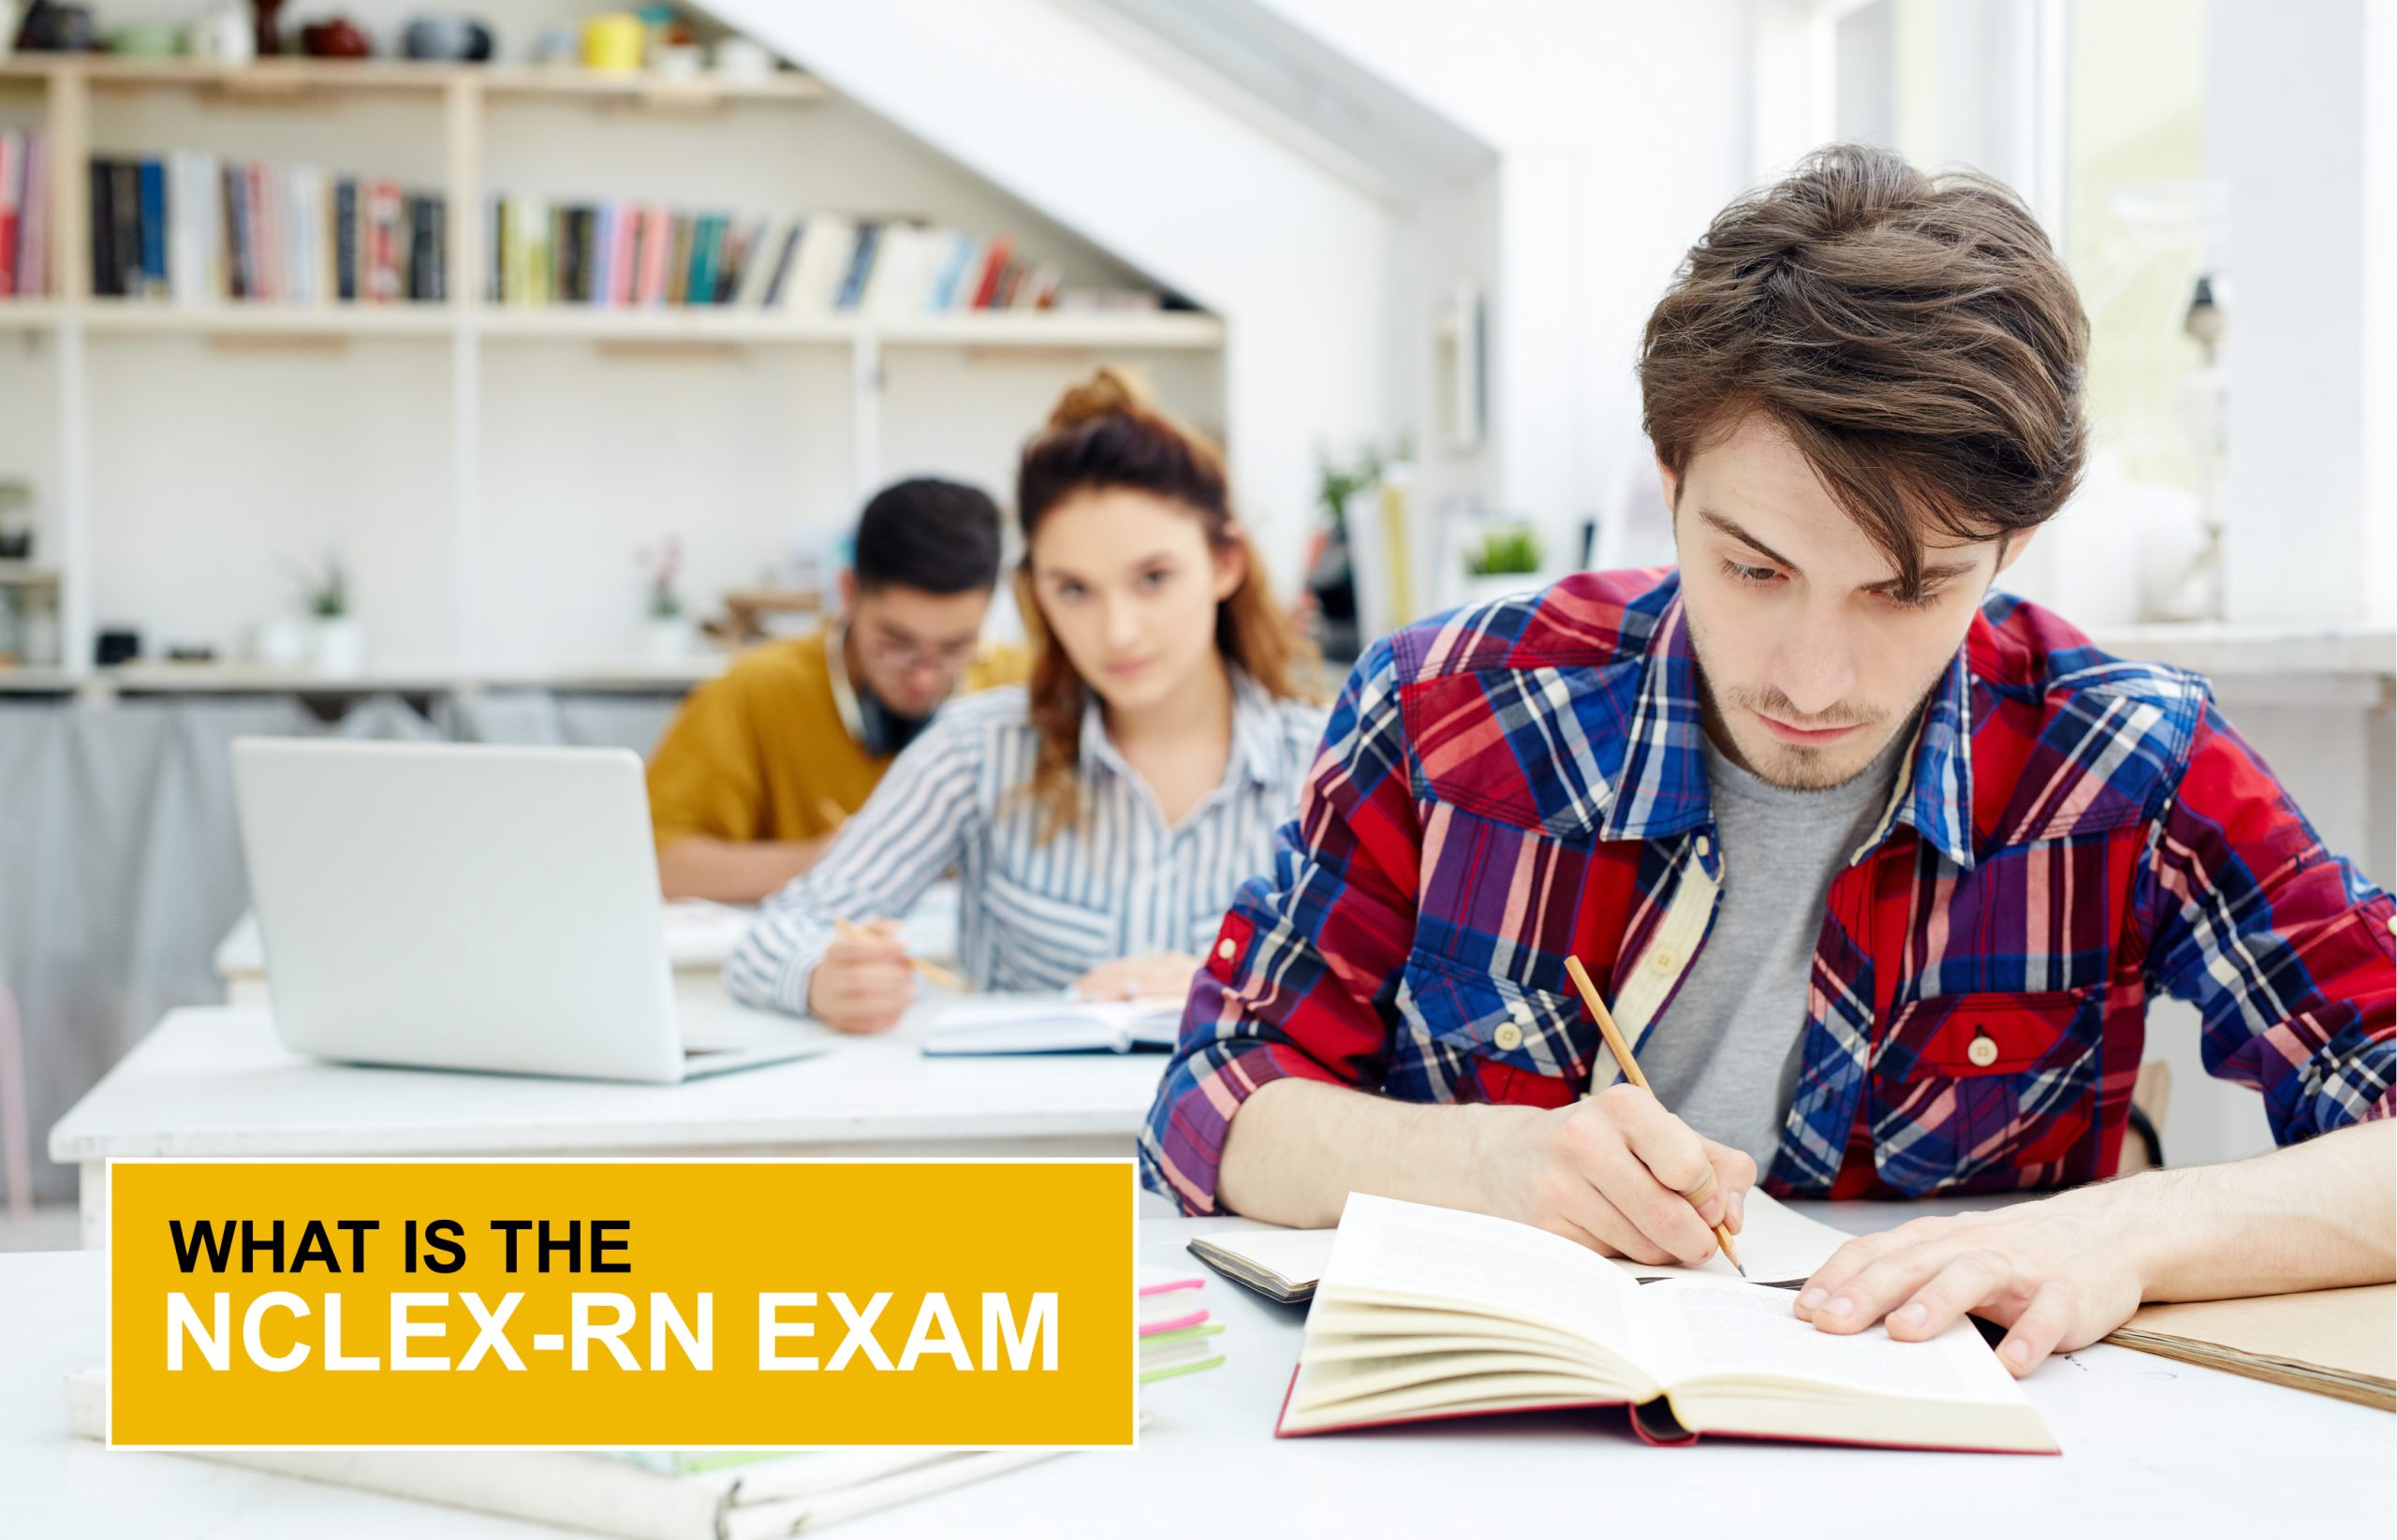 What is the NCLEX-RN exam